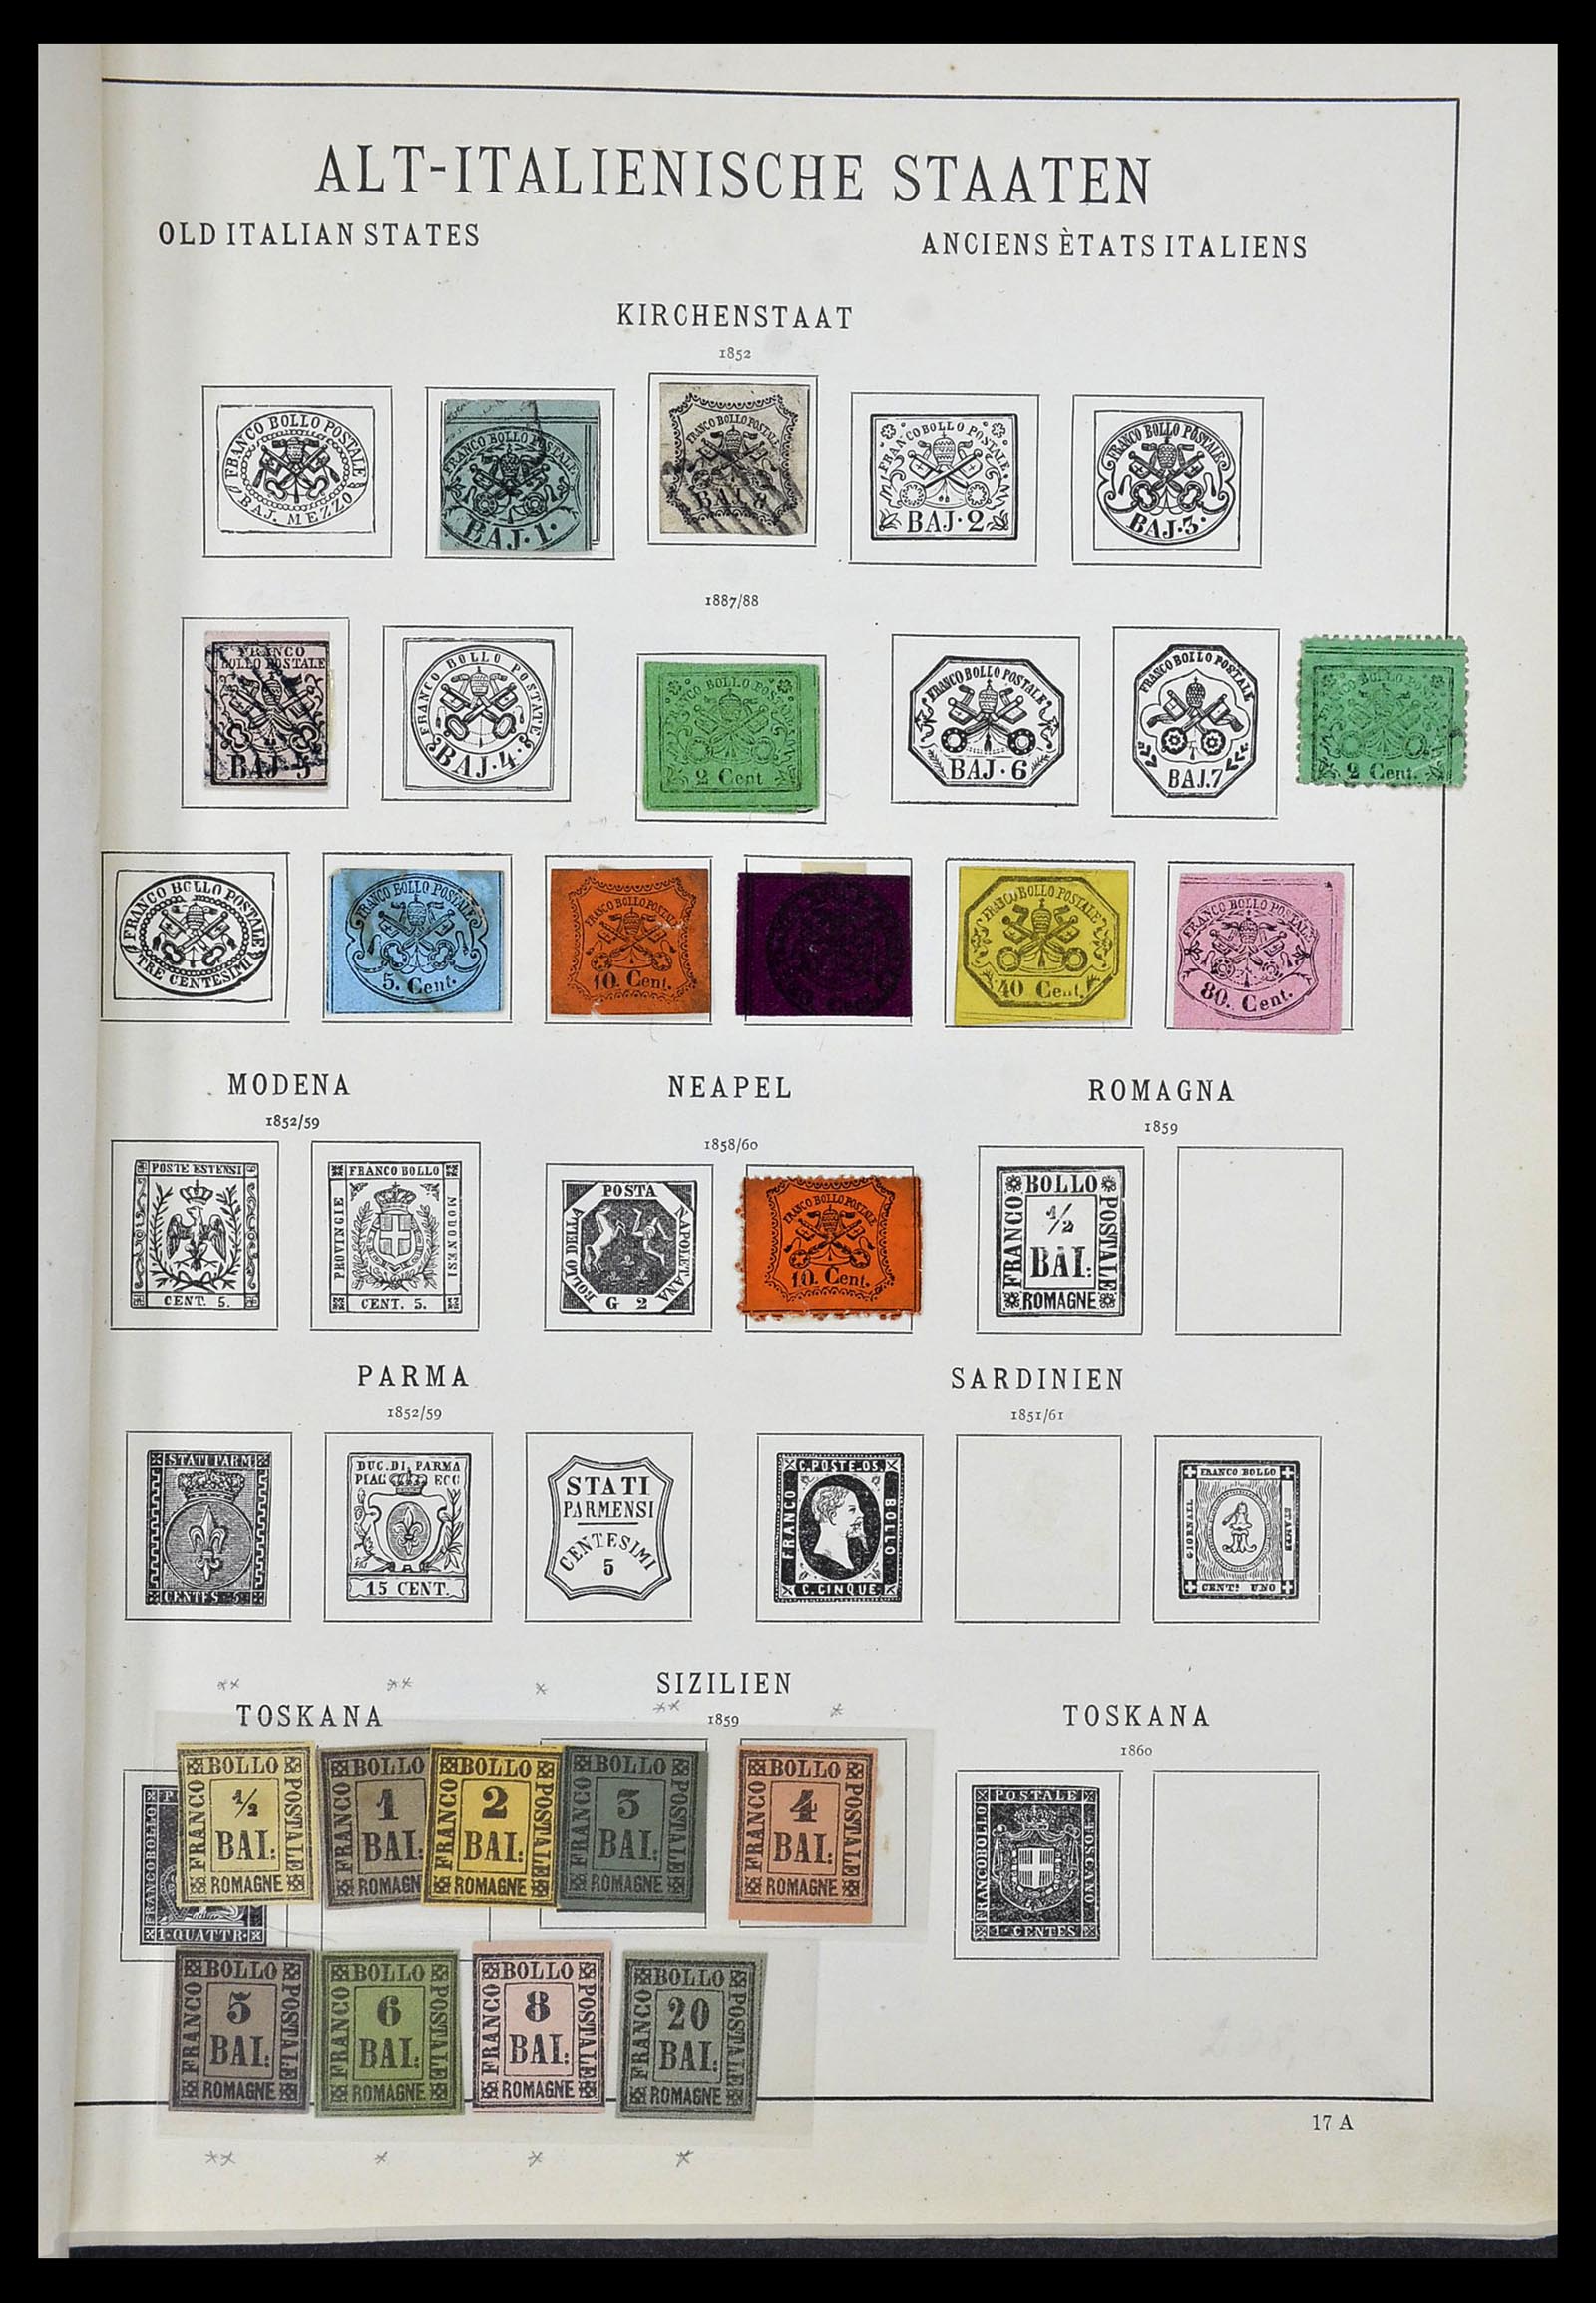 33619 001 - Stamp collection 33619 Italian territories/occupation/colonies 1874-1945